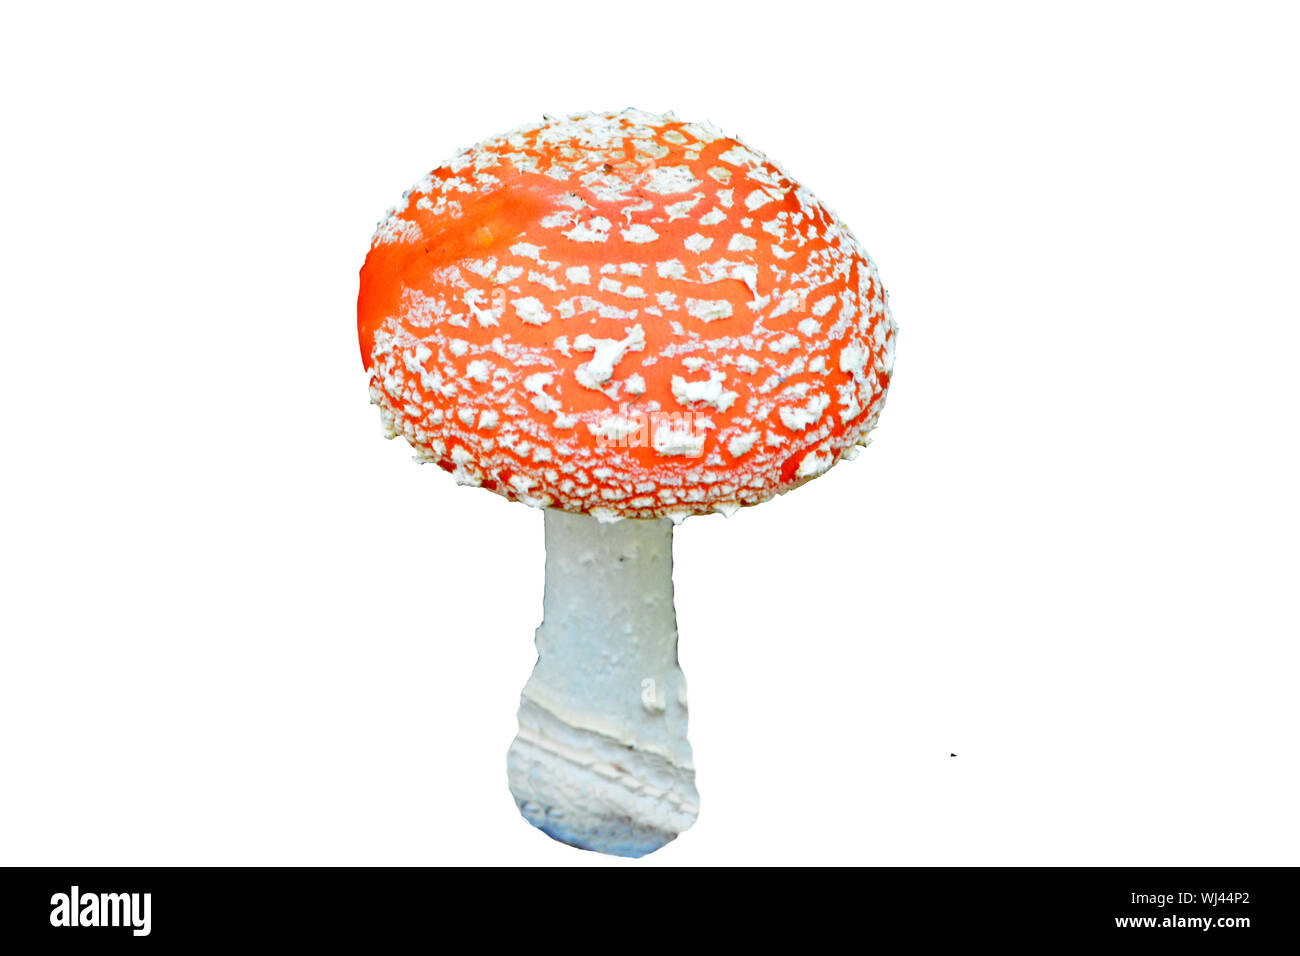 The Amanite Muscaria otherwise known as the Fly Agaric, source of the psycho-active drug Muscarine used by shamans for over 20,000 years. Isolated aga Stock Photo